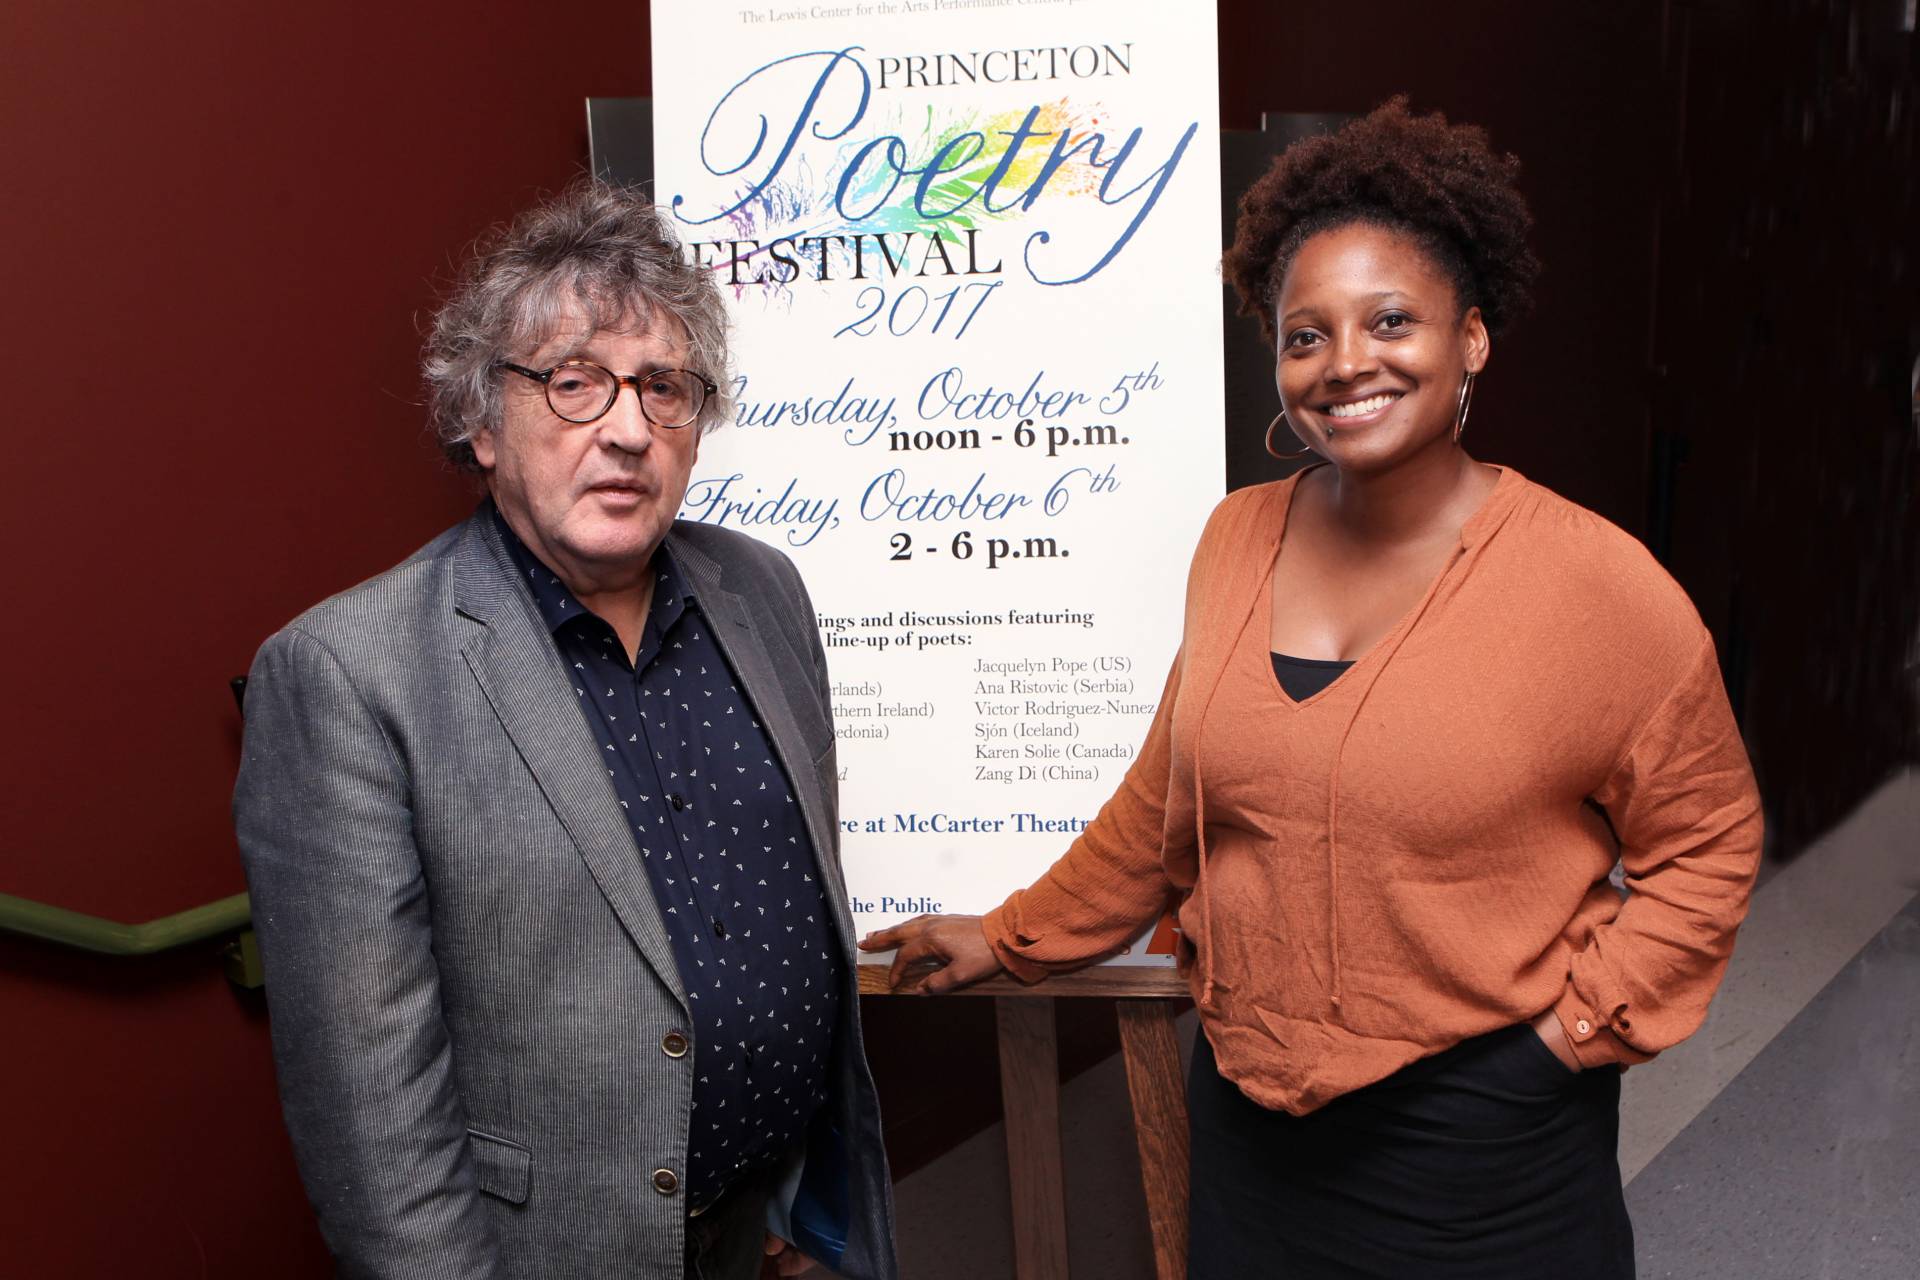 Paul Muldoon and Tracy Smith stand by Poetry Festival poster